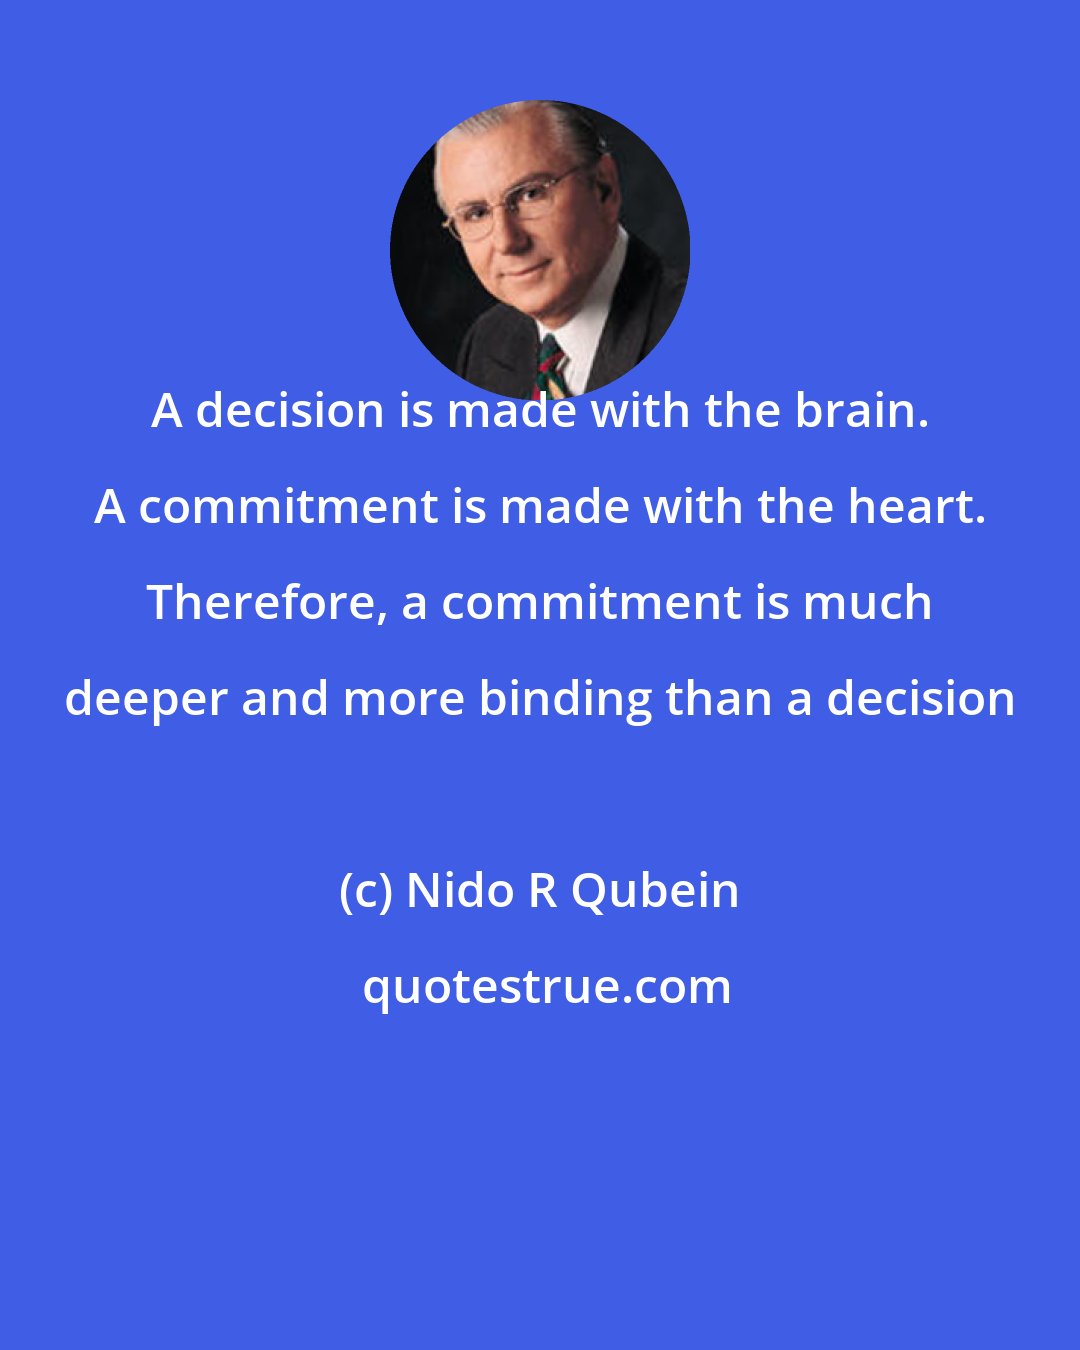 Nido R Qubein: A decision is made with the brain. A commitment is made with the heart. Therefore, a commitment is much deeper and more binding than a decision